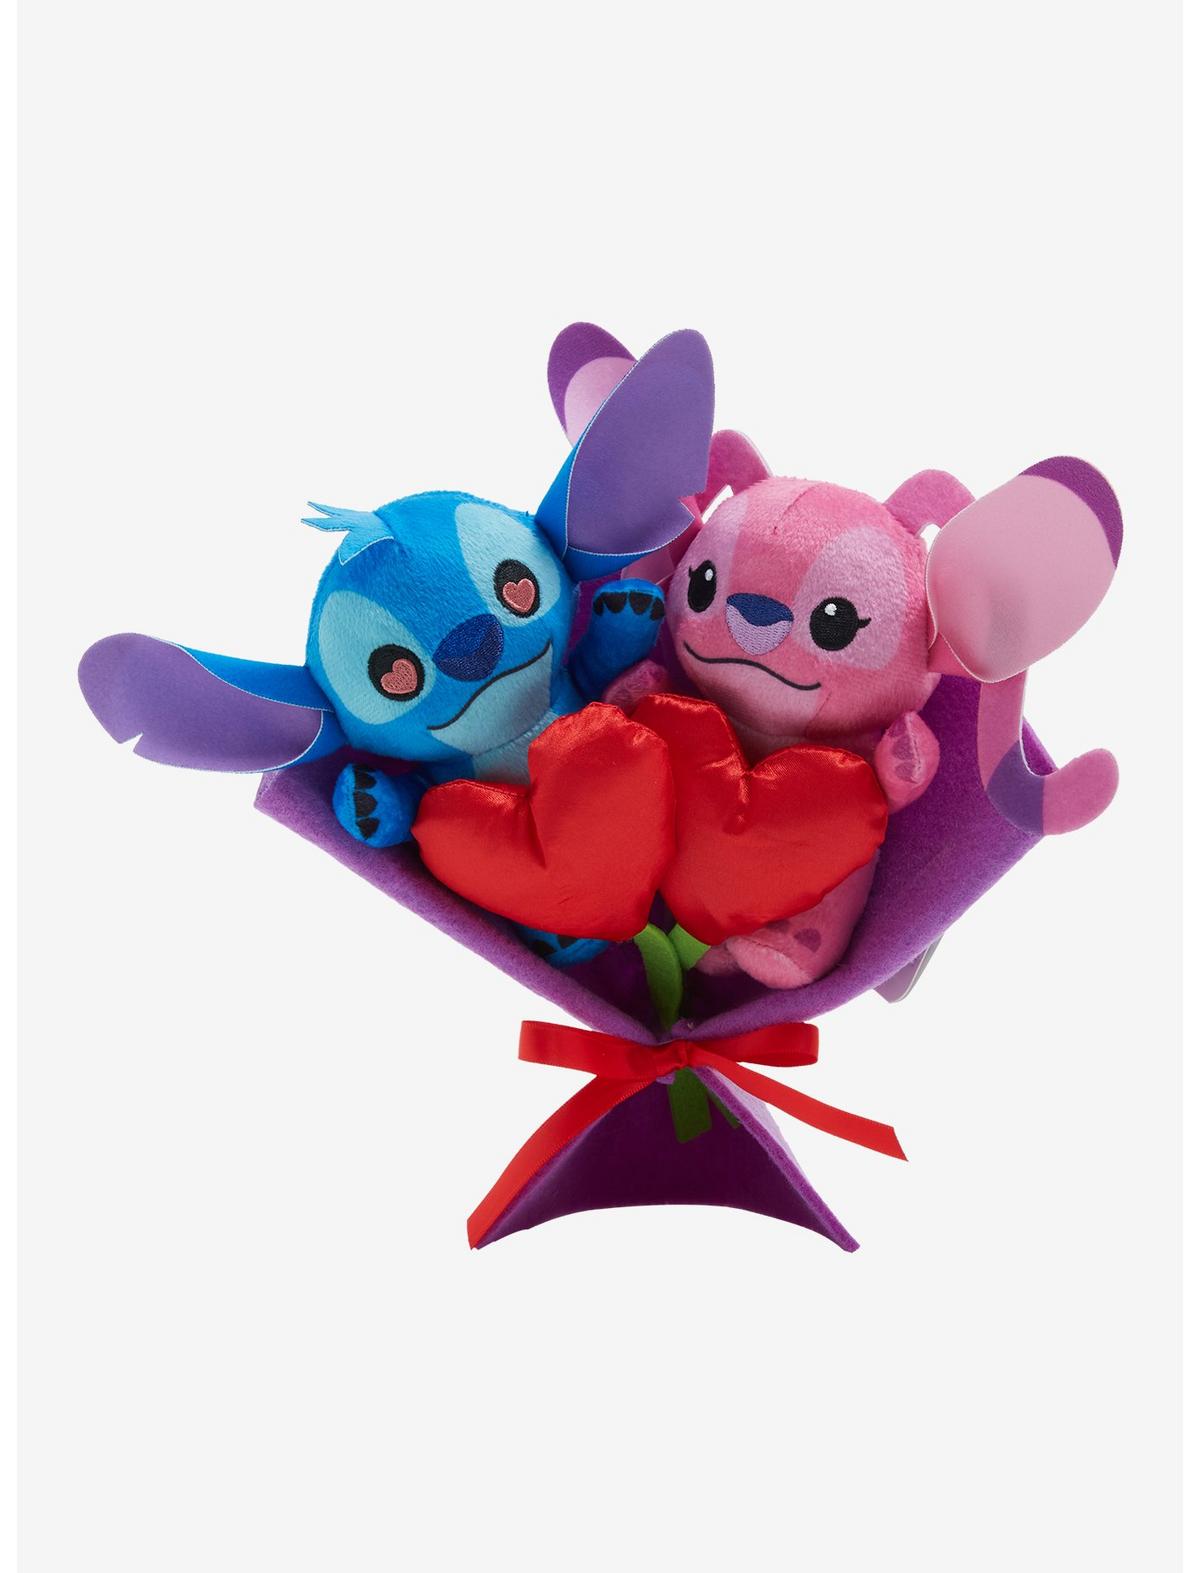 Valentine's Bouquet - Disney Stitch and Angel Plush - Hot Topic Exclusive